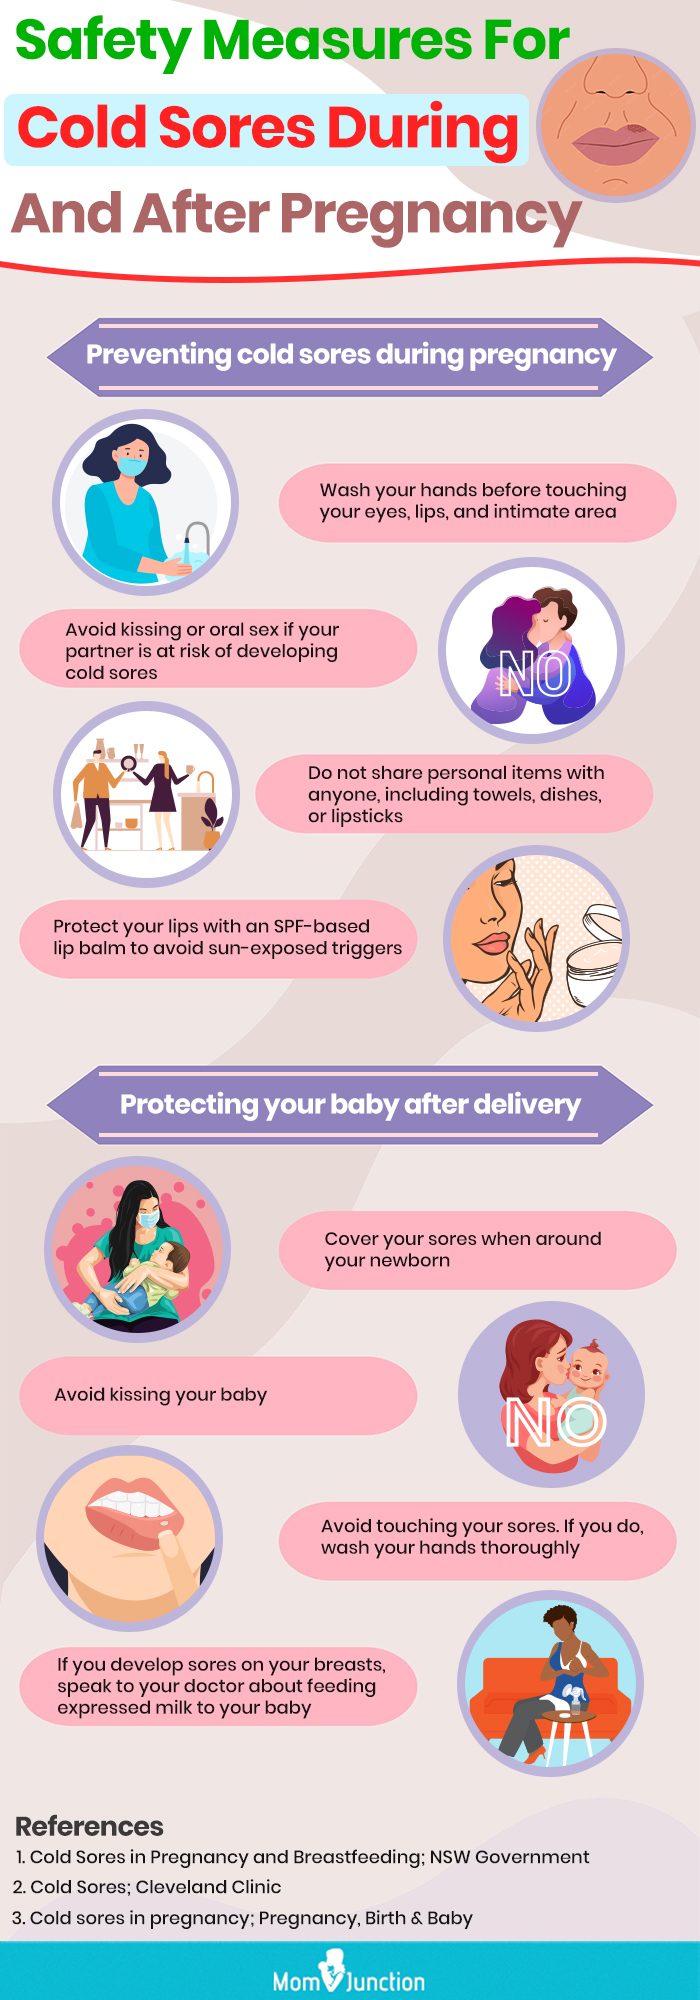 cold sores during and after pregnancy (infographic)